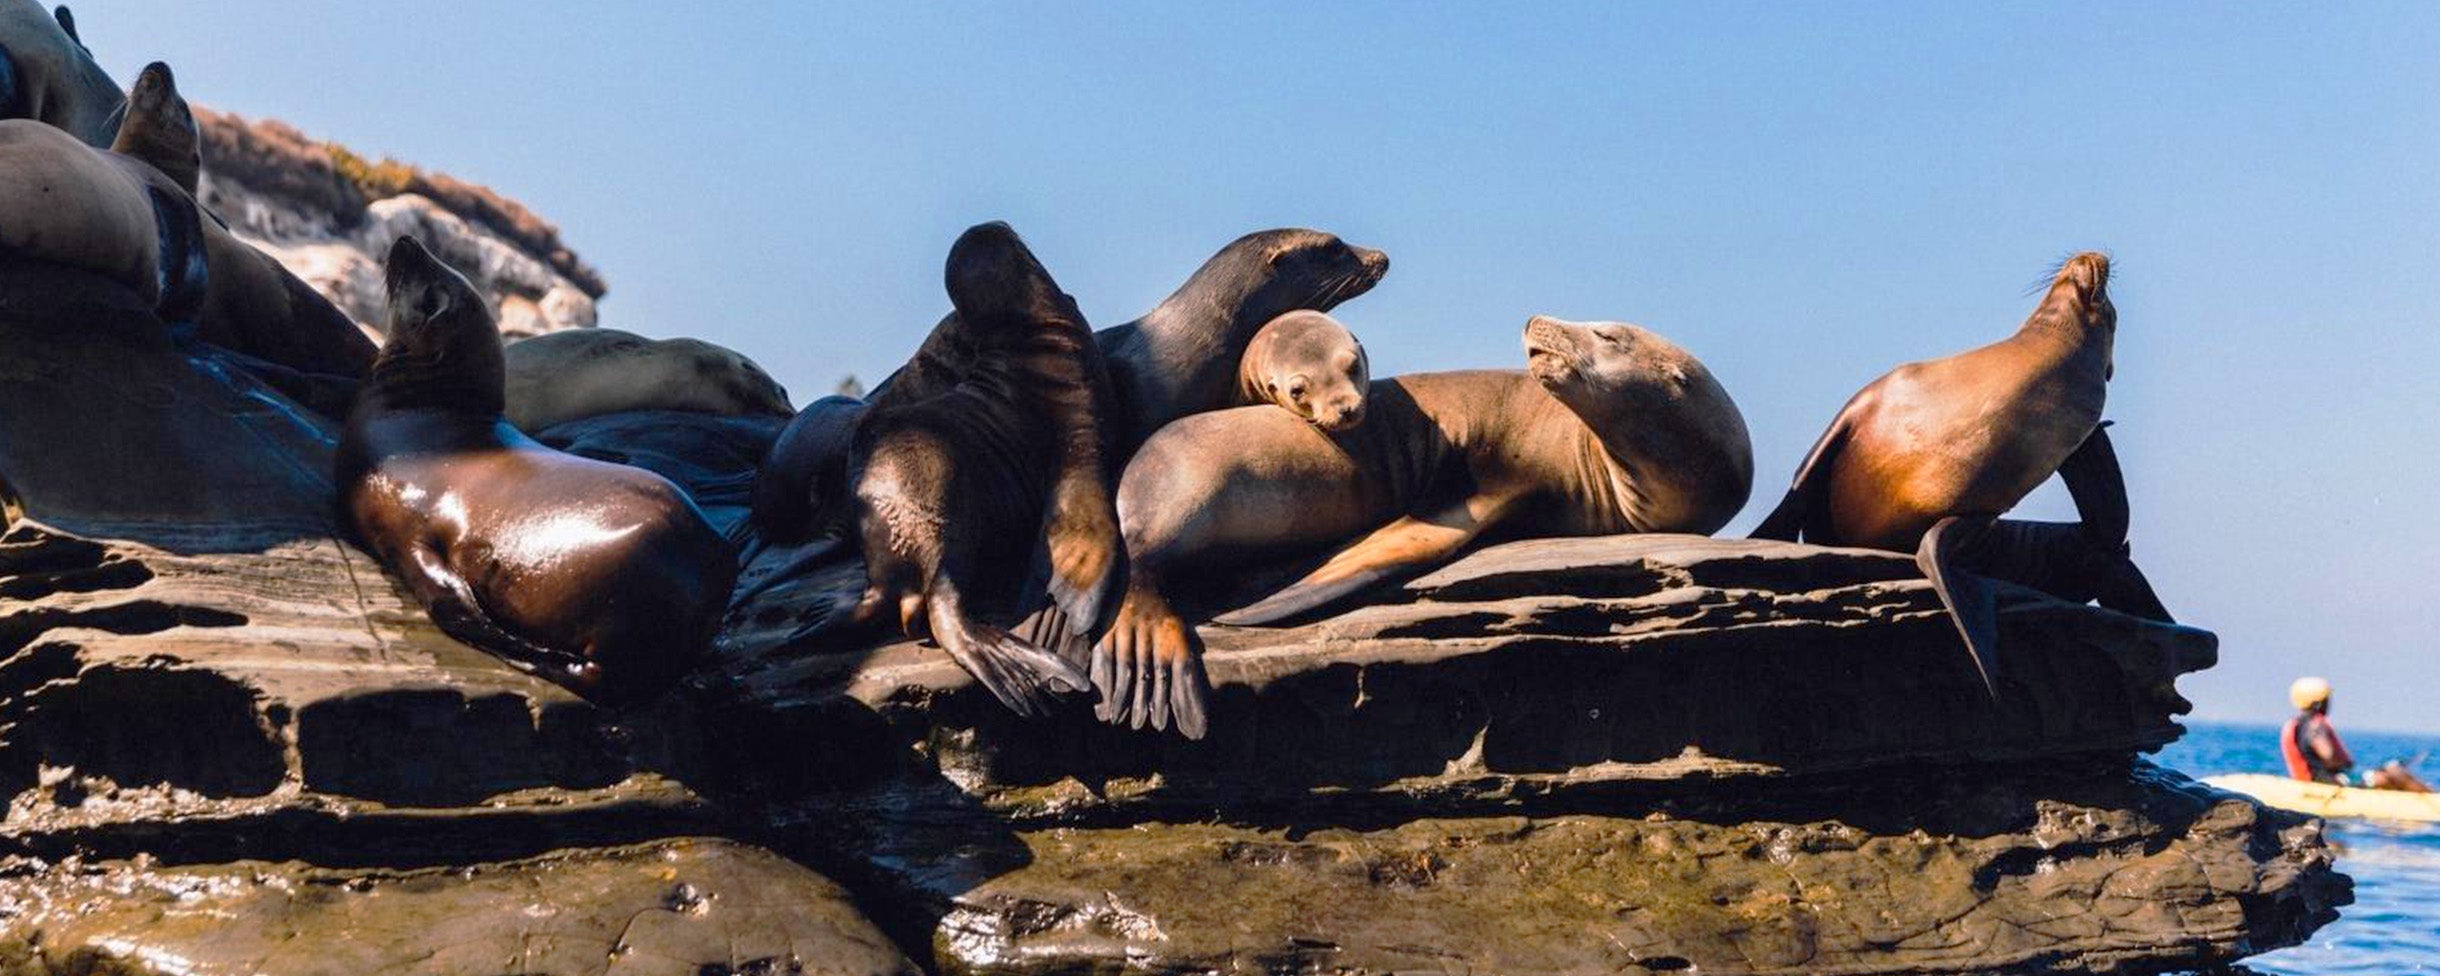 A group of California Sea Lions sunbathing on a rock off the coast of La Jolla - a common sight you see during a Sea Cave Kayak Tour with Everyday California.